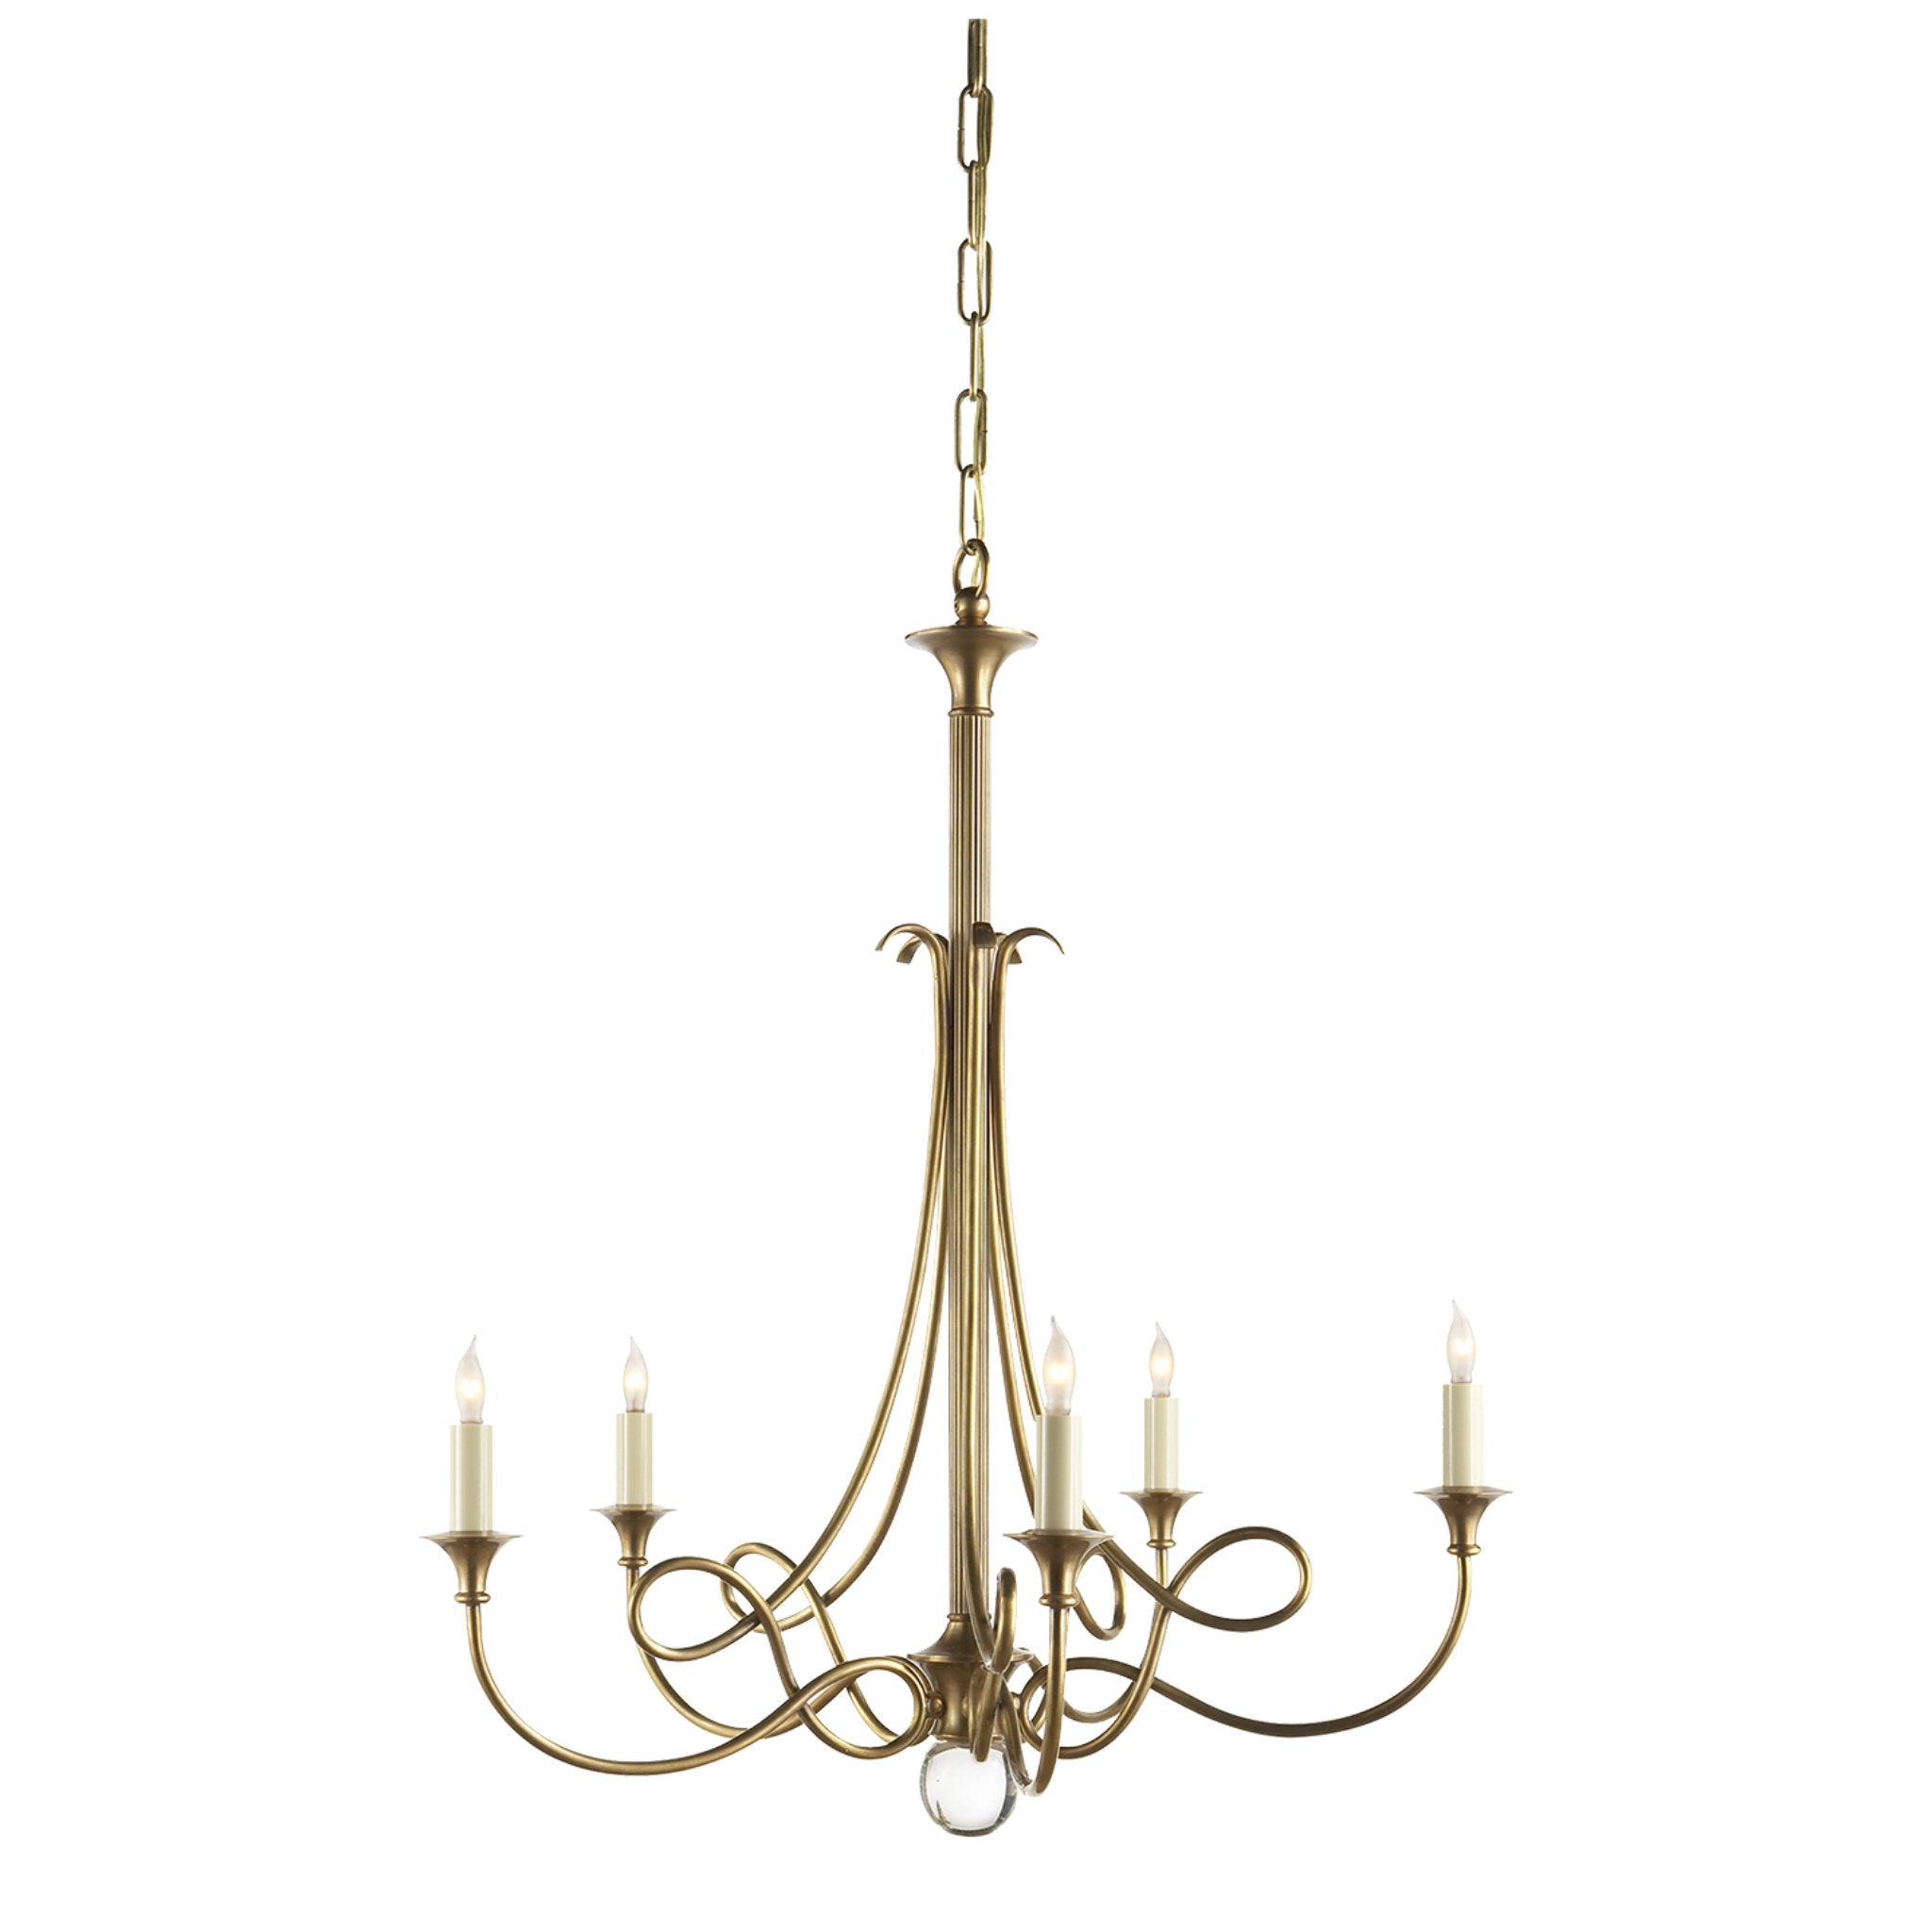 Eric Cohler Twist Chandelier in Hand-Rubbed Antique Brass